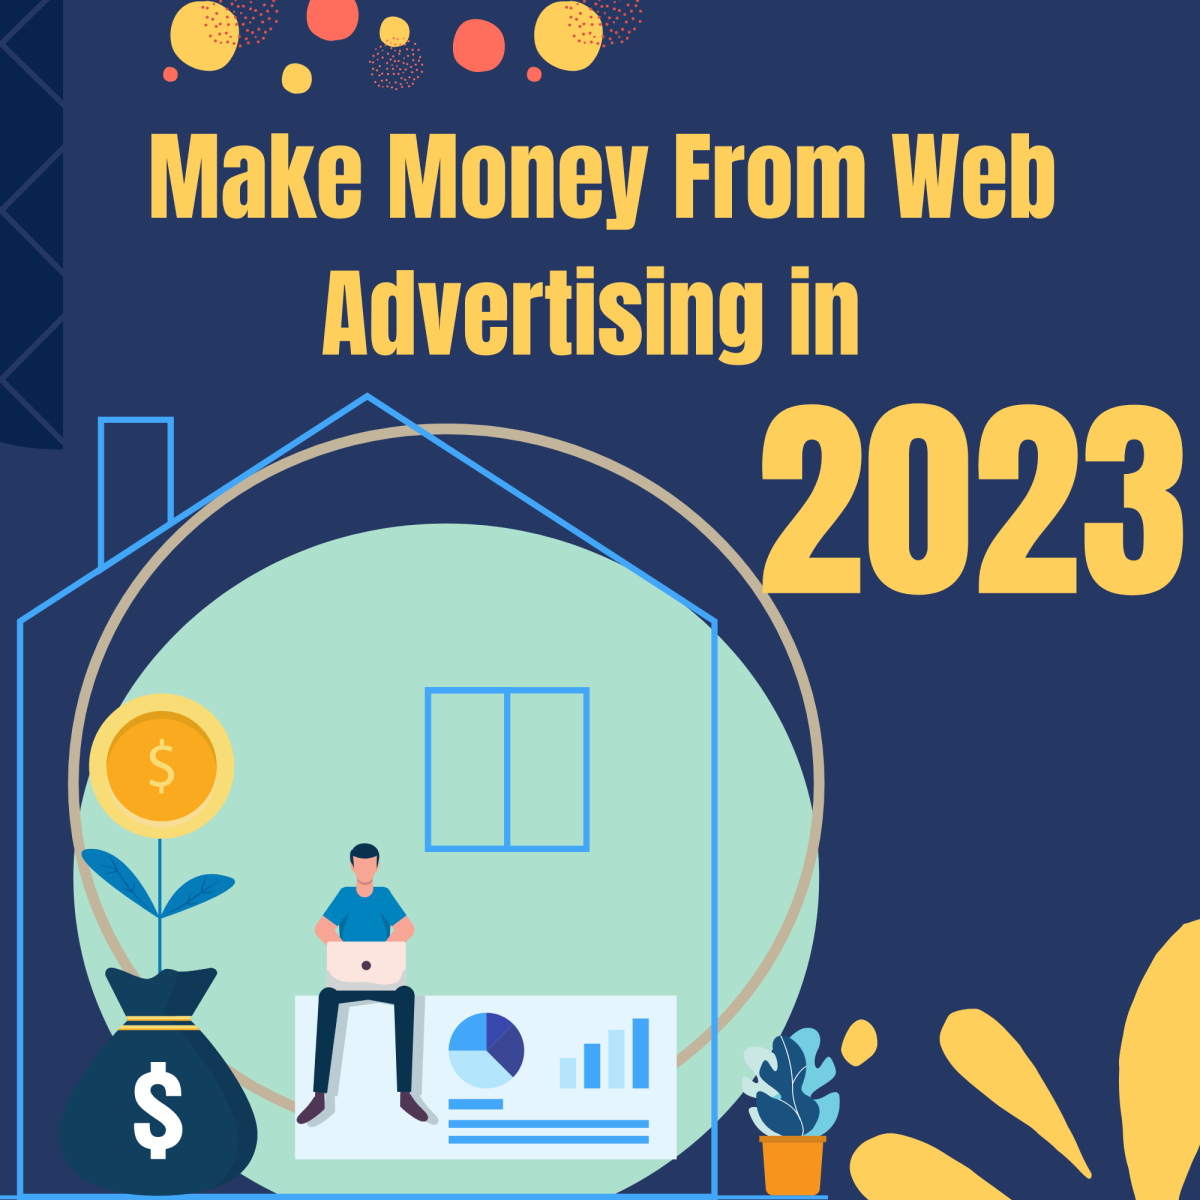 tips-to-make-money-web-advertising-in-2023